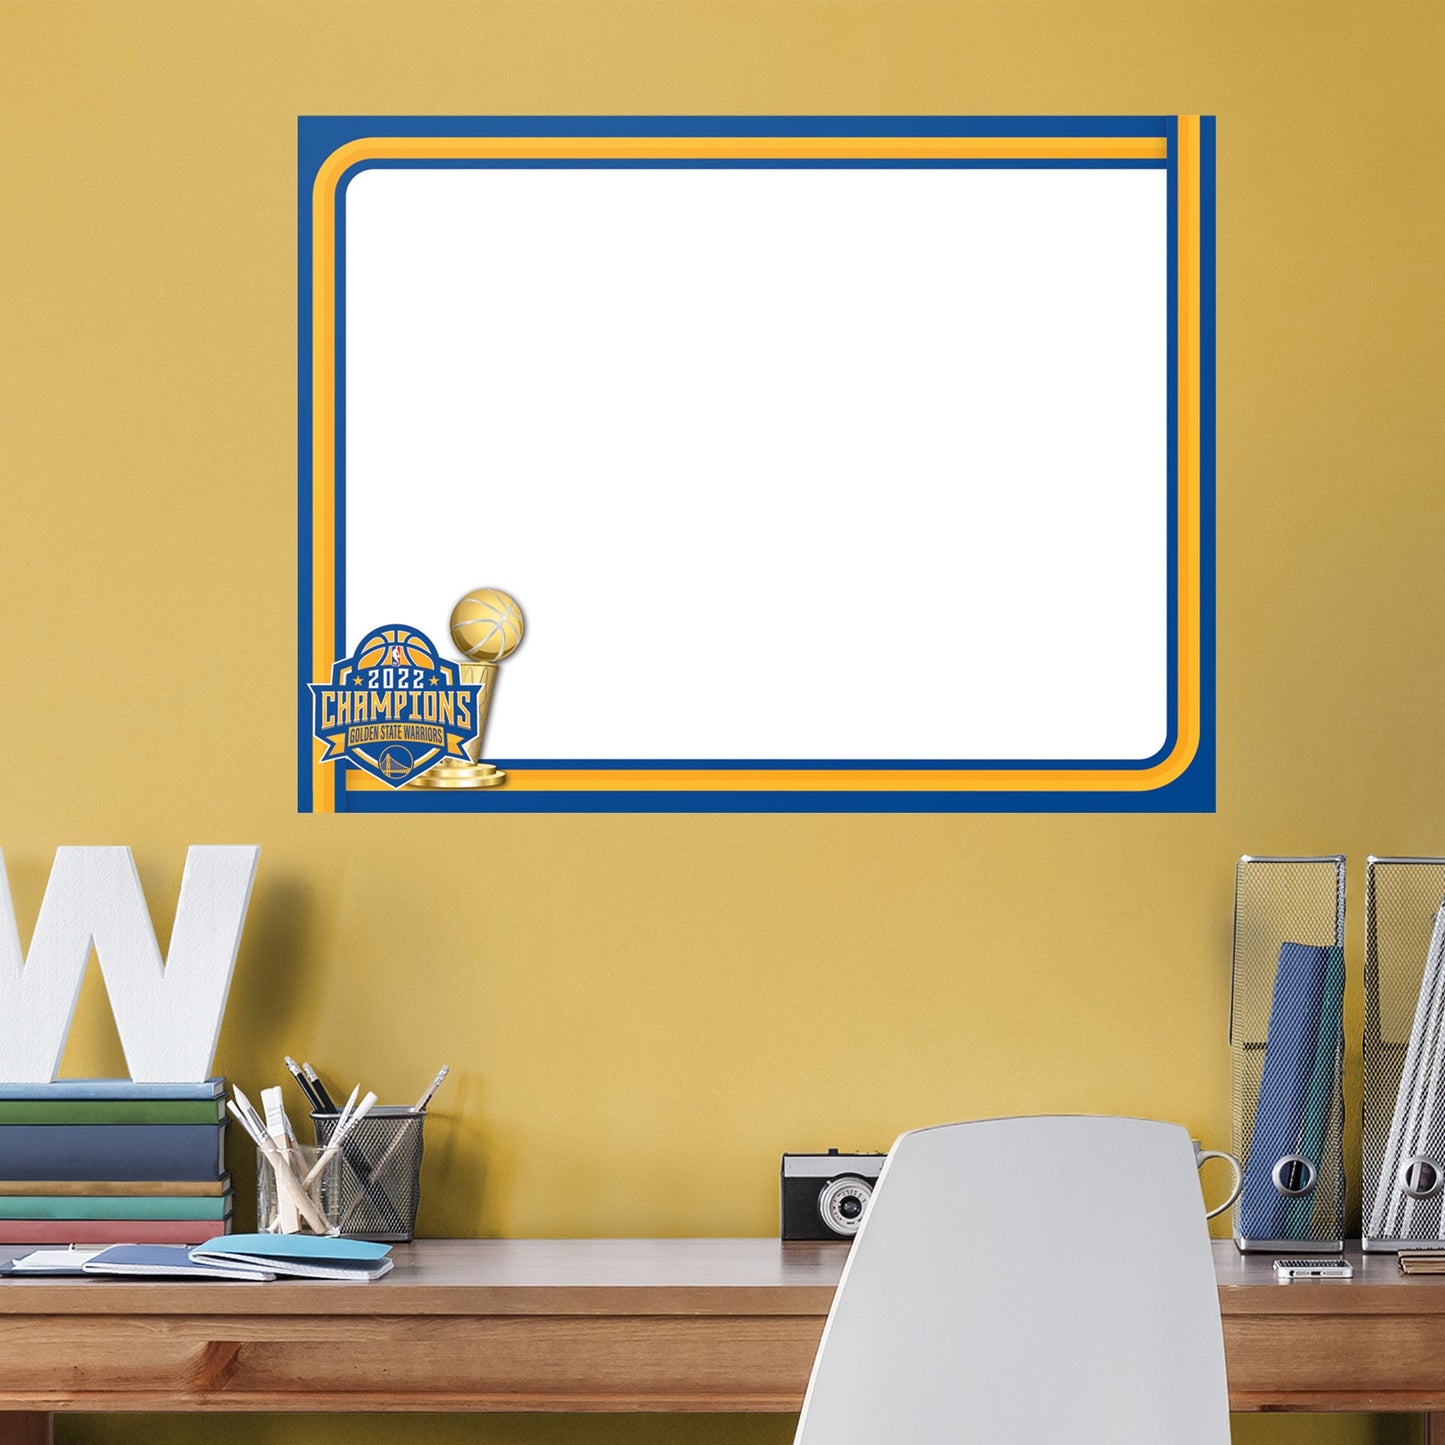 Golden State Warriors: 2022 Champions Dry Erase Whiteboard - Officially Licensed NBA Removable Adhesive Decal